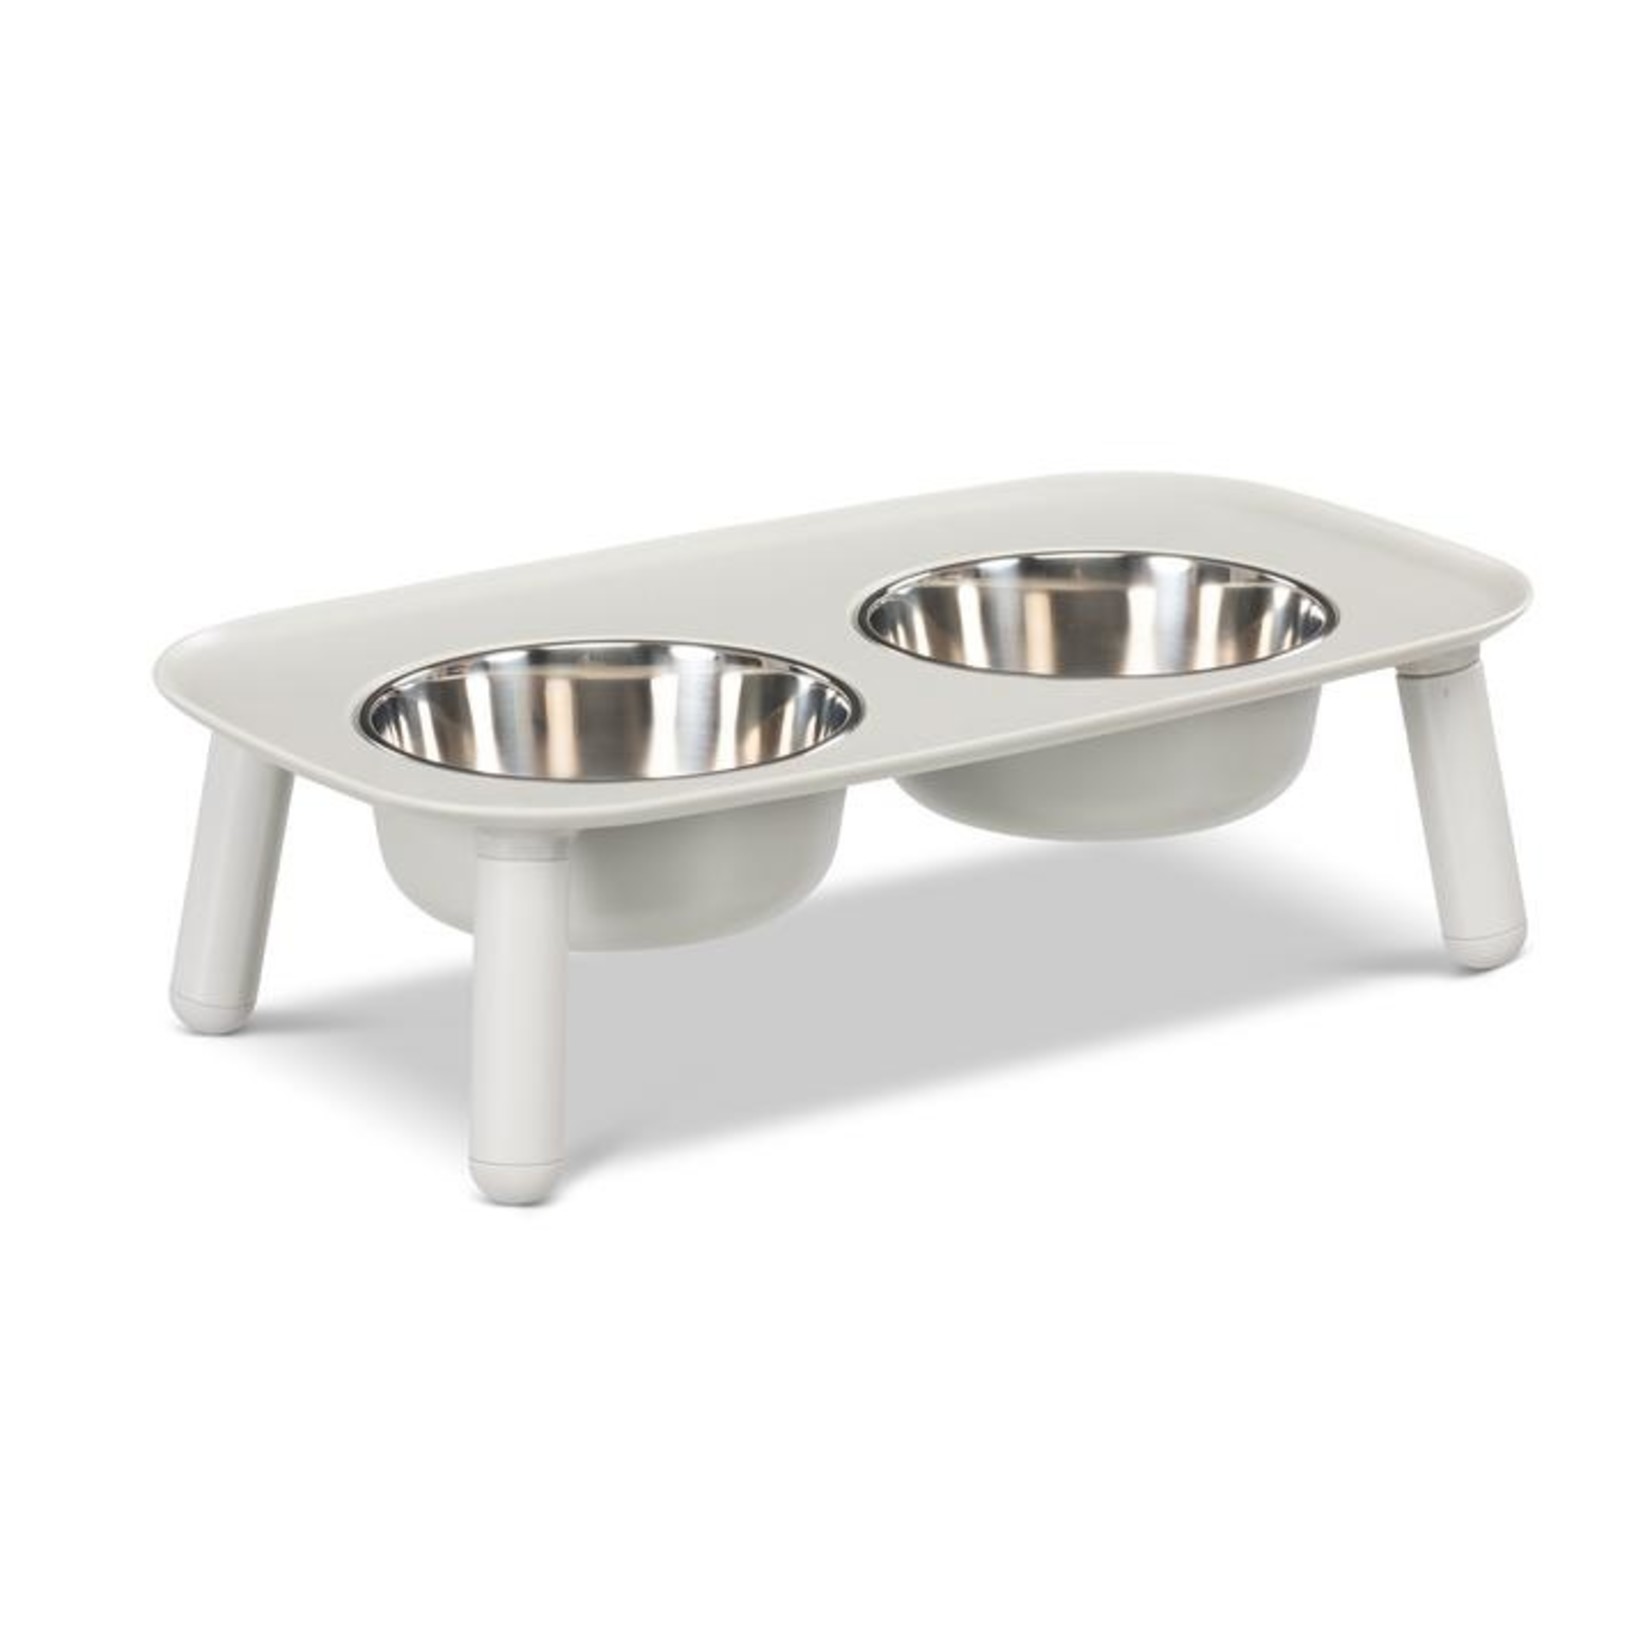 Messy Mutts MESSY MUTTS ELEVATED DOUBLE FEEDER - ADJUSTABLE  SILVER